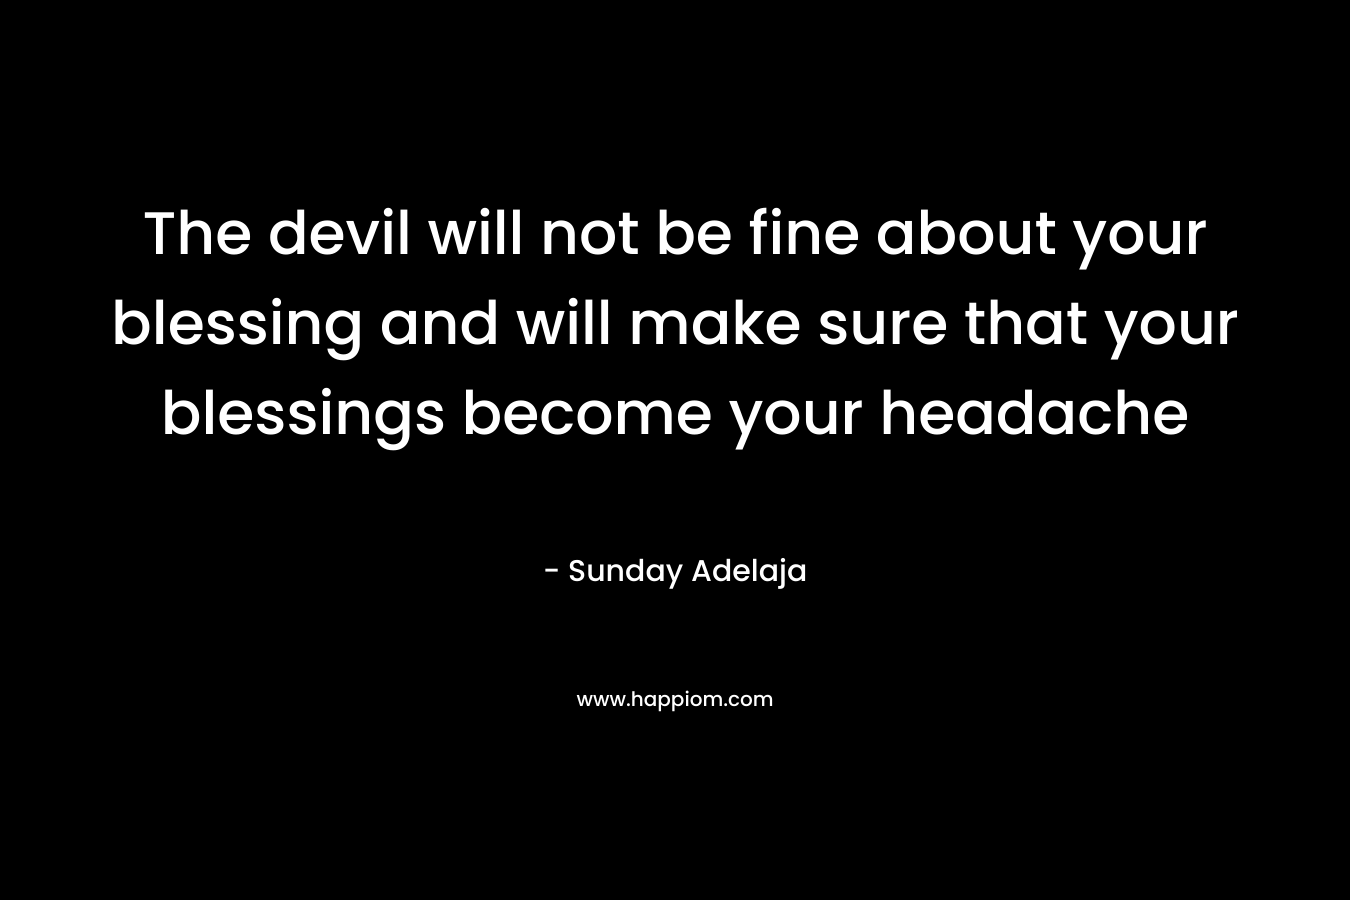 The devil will not be fine about your blessing and will make sure that your blessings become your headache – Sunday Adelaja